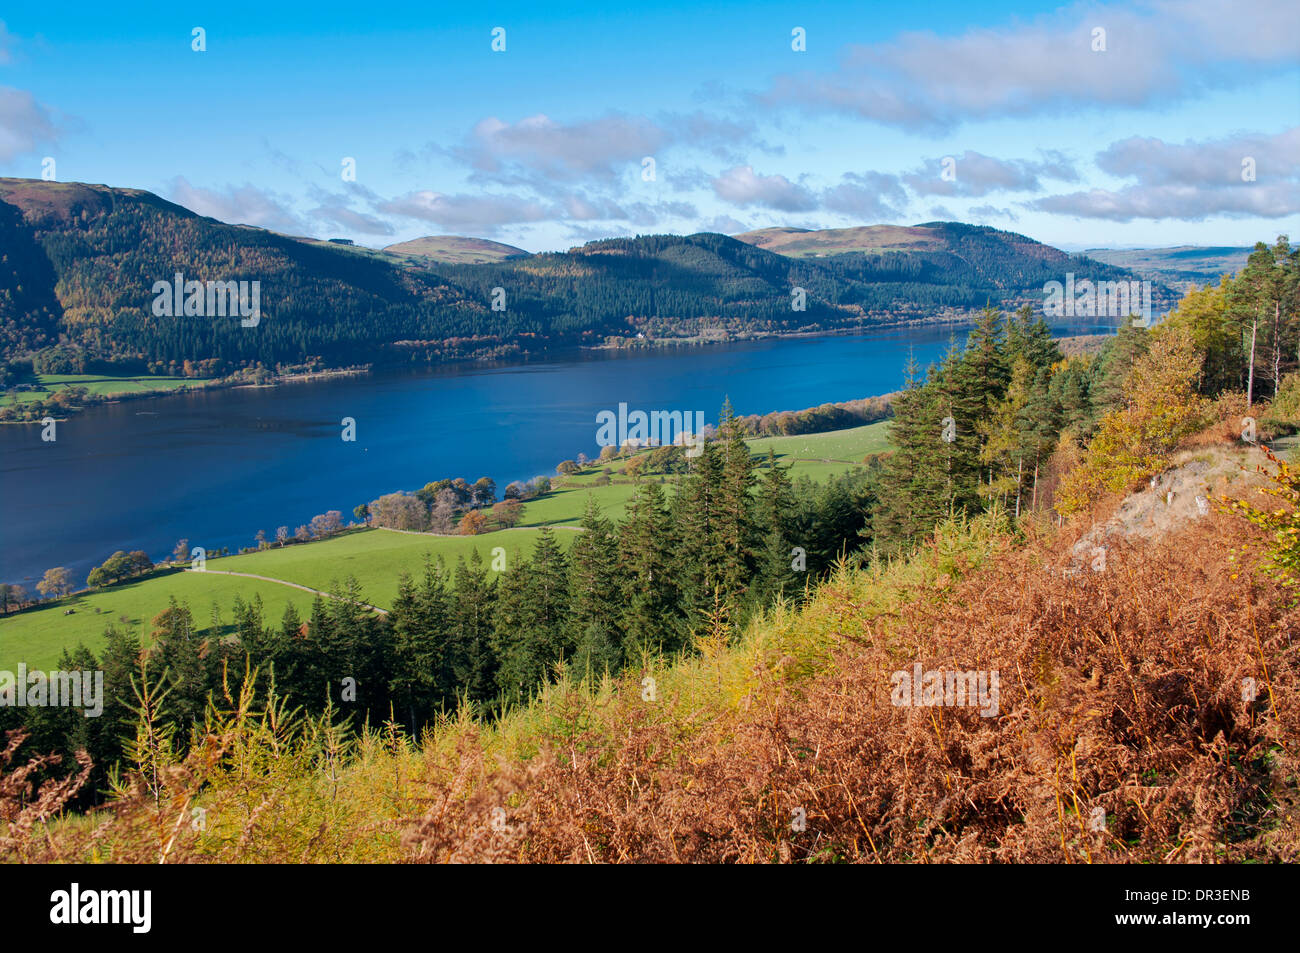 Lake Bassenthwaite and lakeside meadows seen from Dodd Wood, autumn, Lake District National Park, Cumbria, England, UK Stock Photo